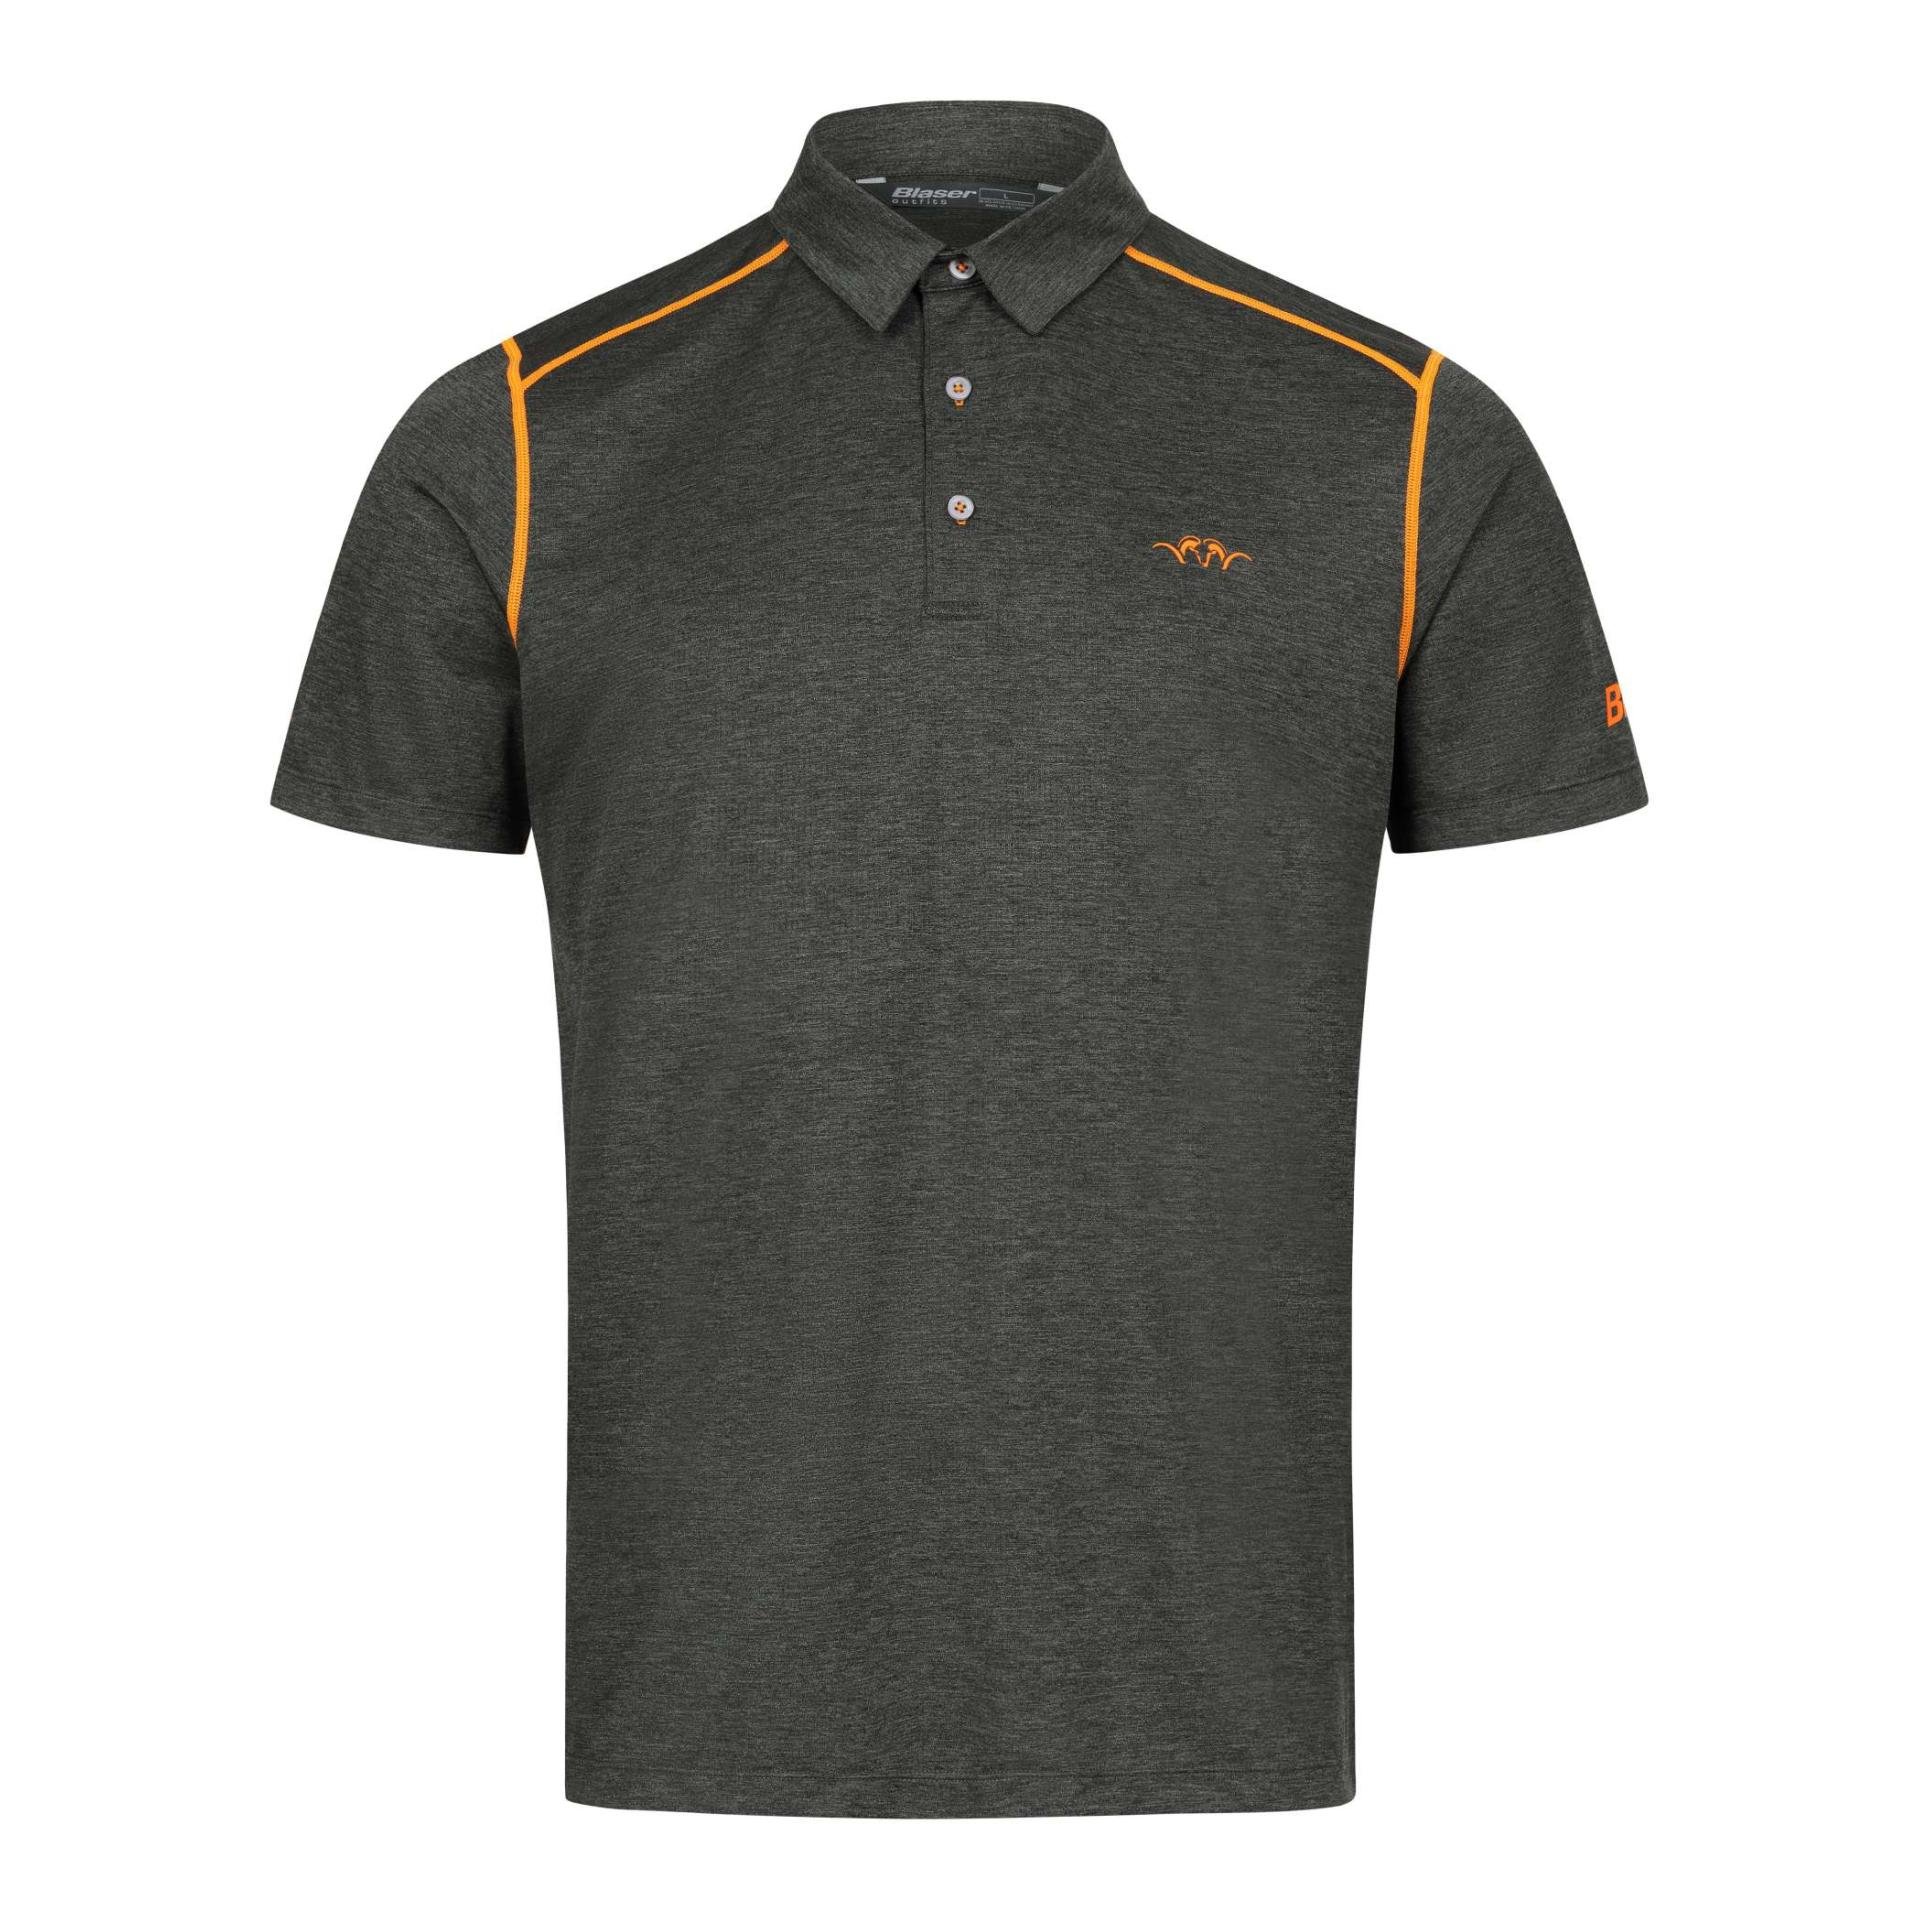 Blaser Men’s Competition Polo Shirt 23